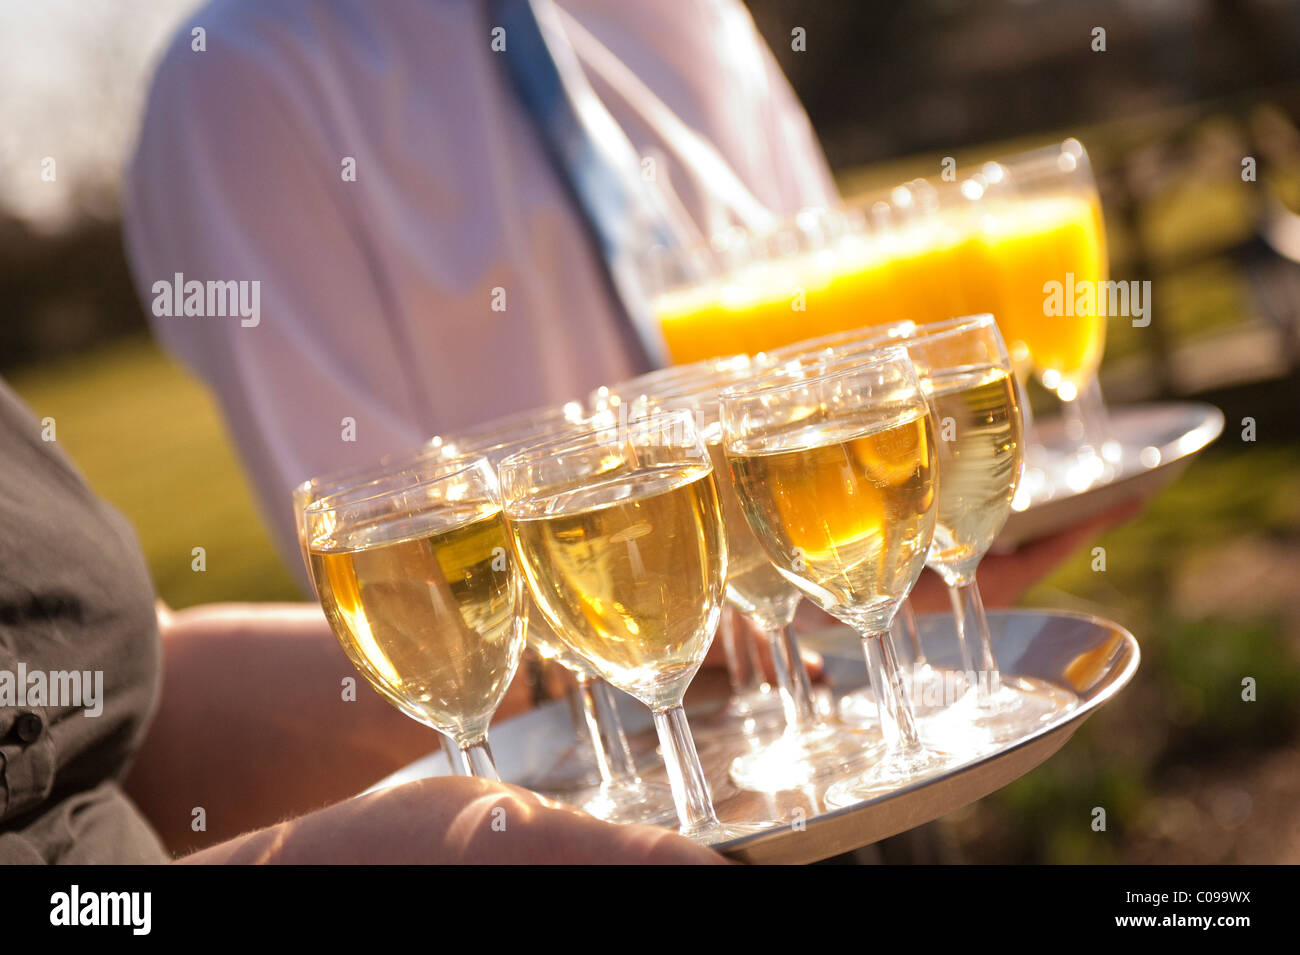 Waiter and waitress serving glasses of wine and orange juice on silver trays at a function Stock Photo